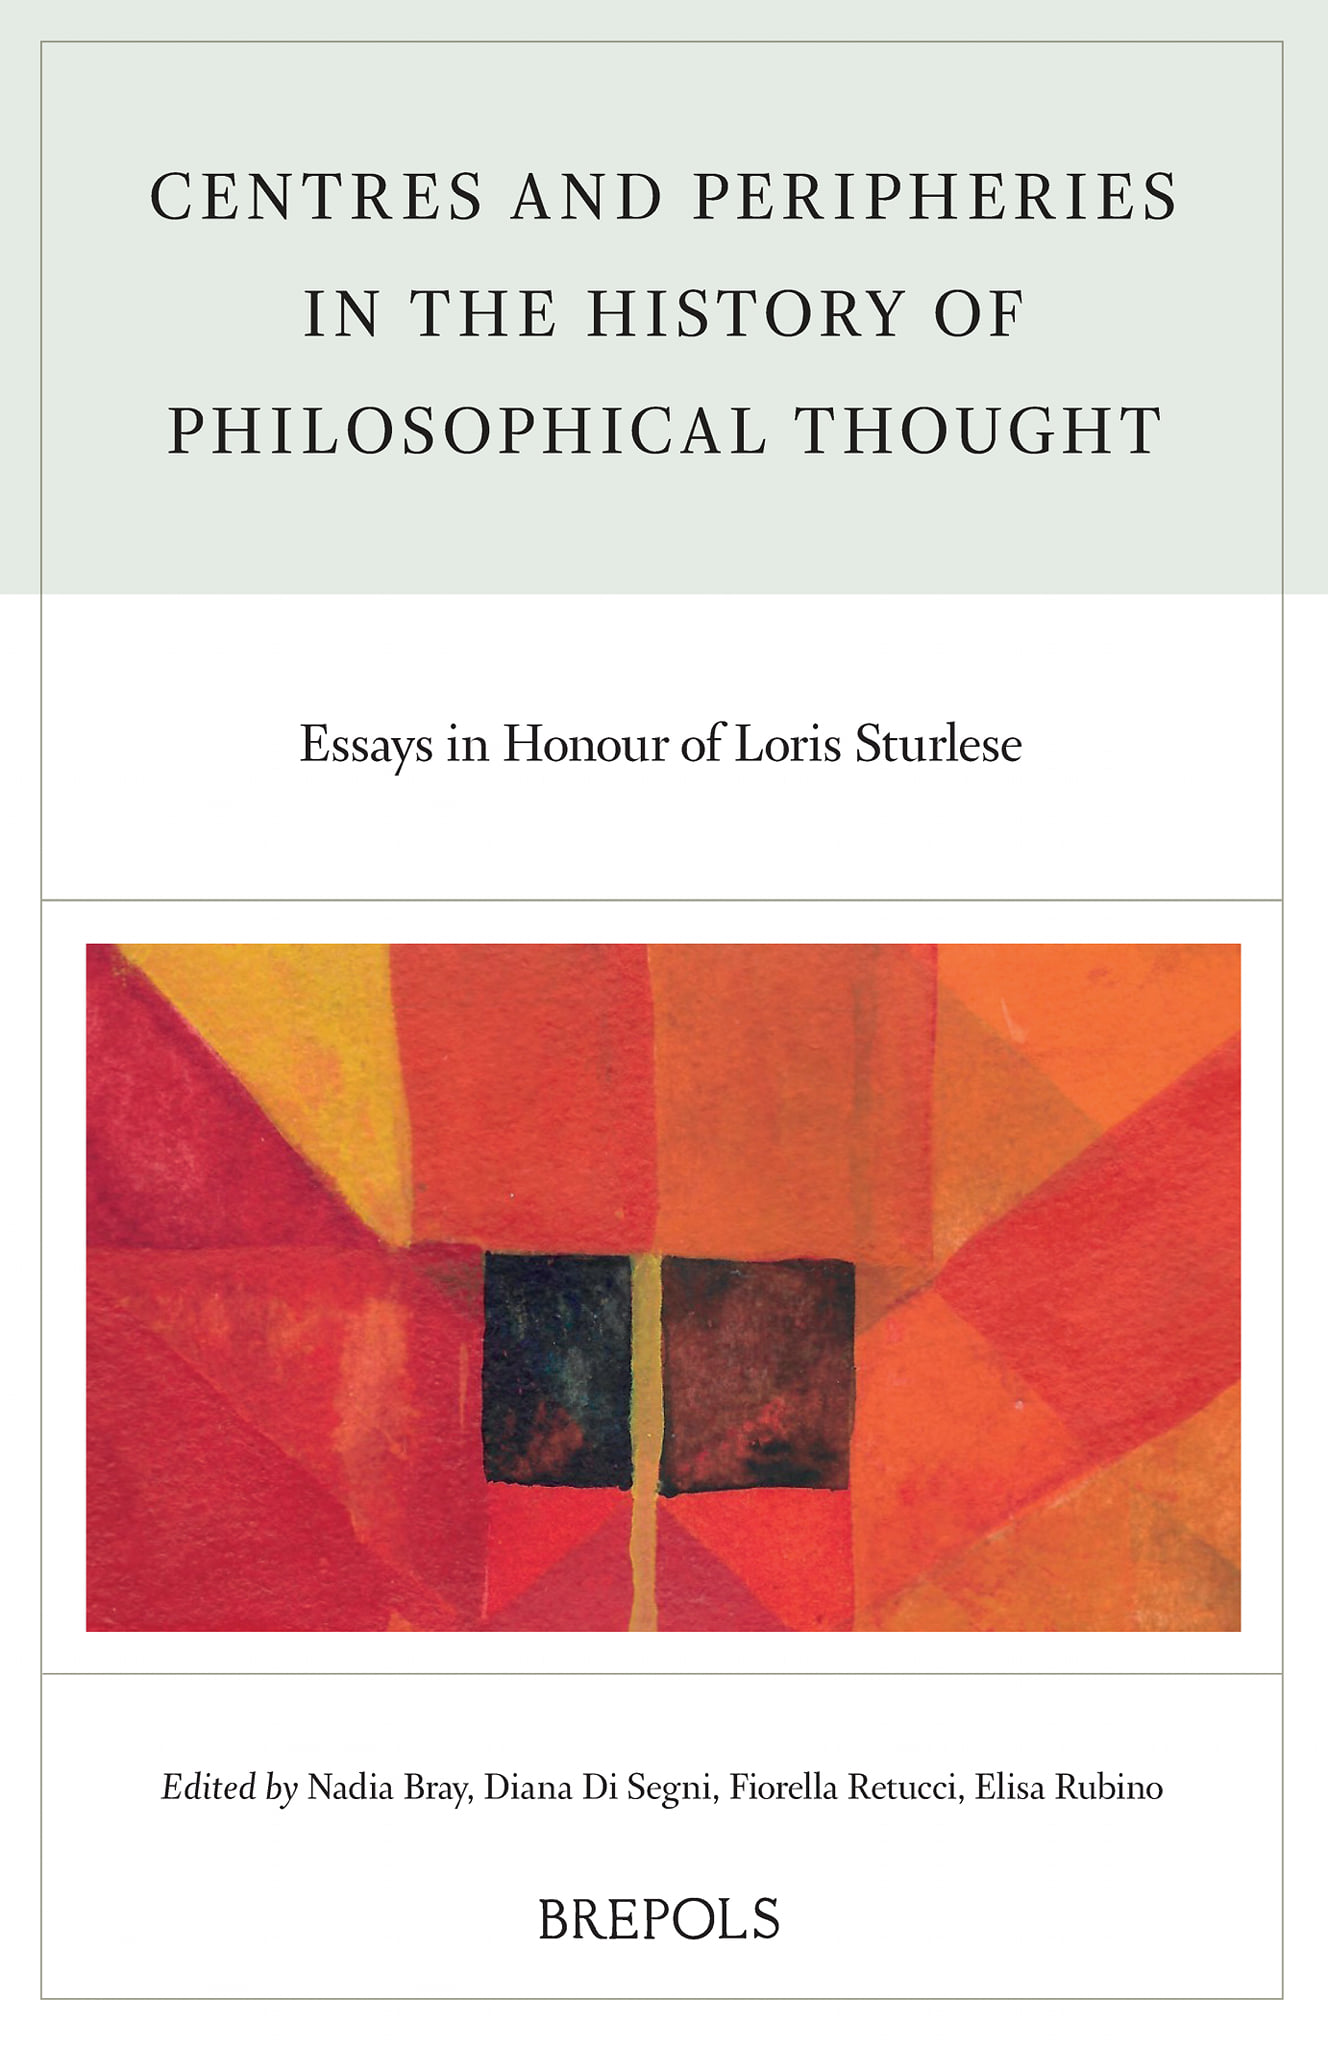 Centres and Peripheries in the History of Philosophical Thought